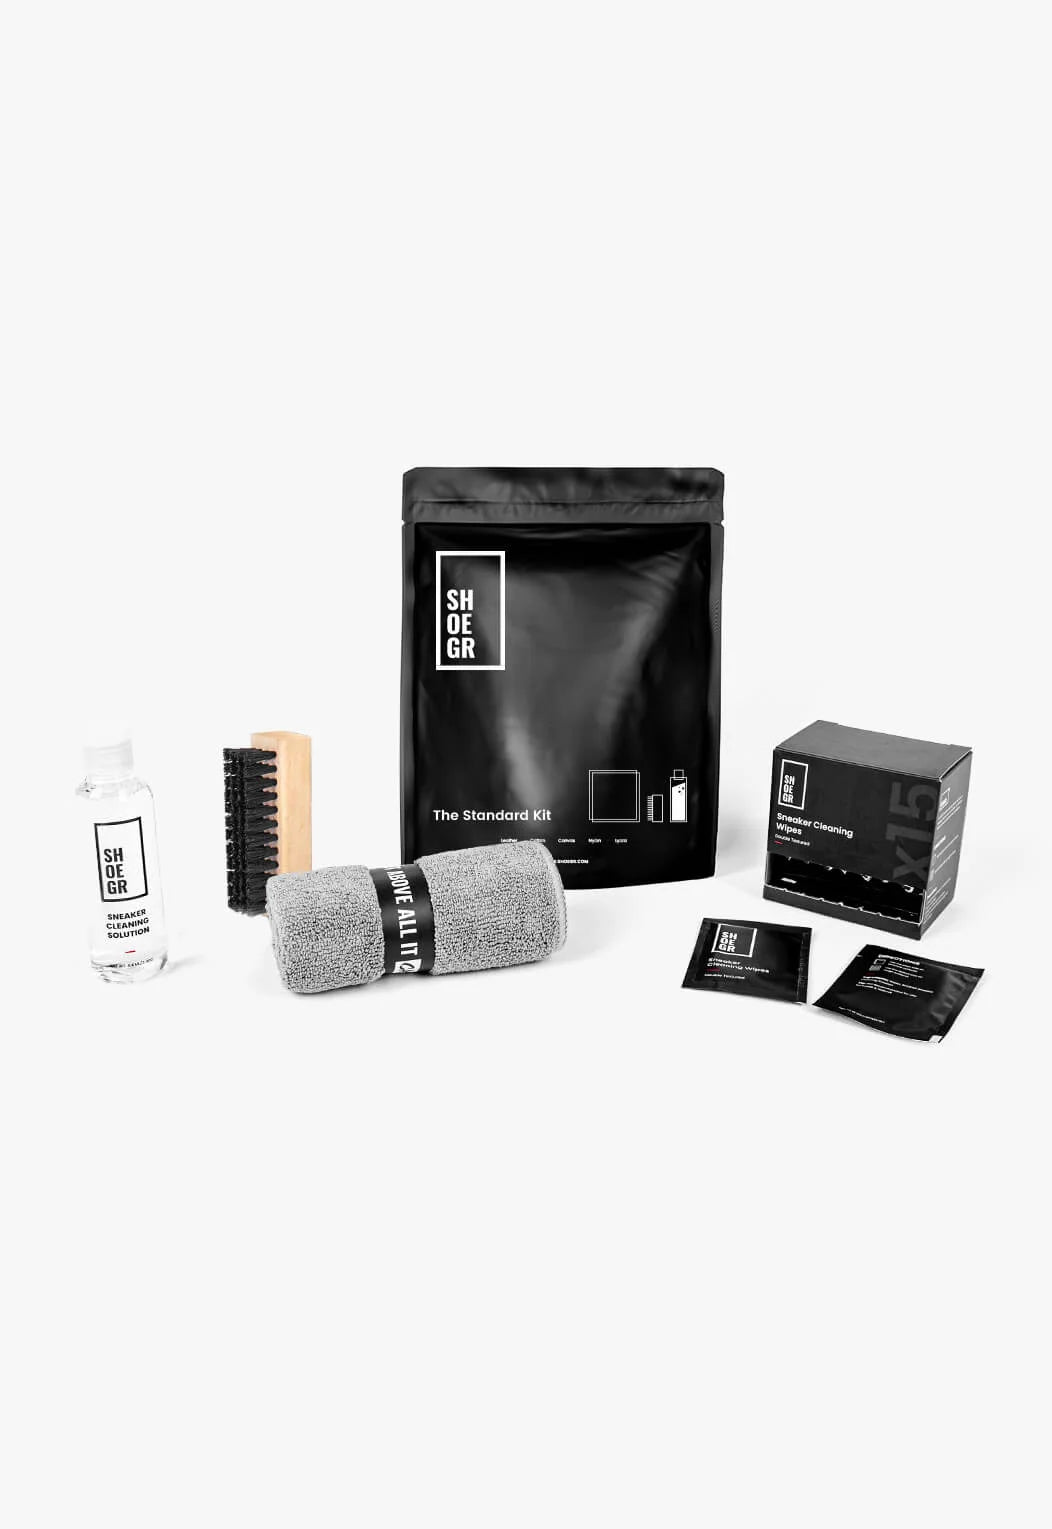 shoegr shoe cleaning kit and sneaker wipes bundle combo 